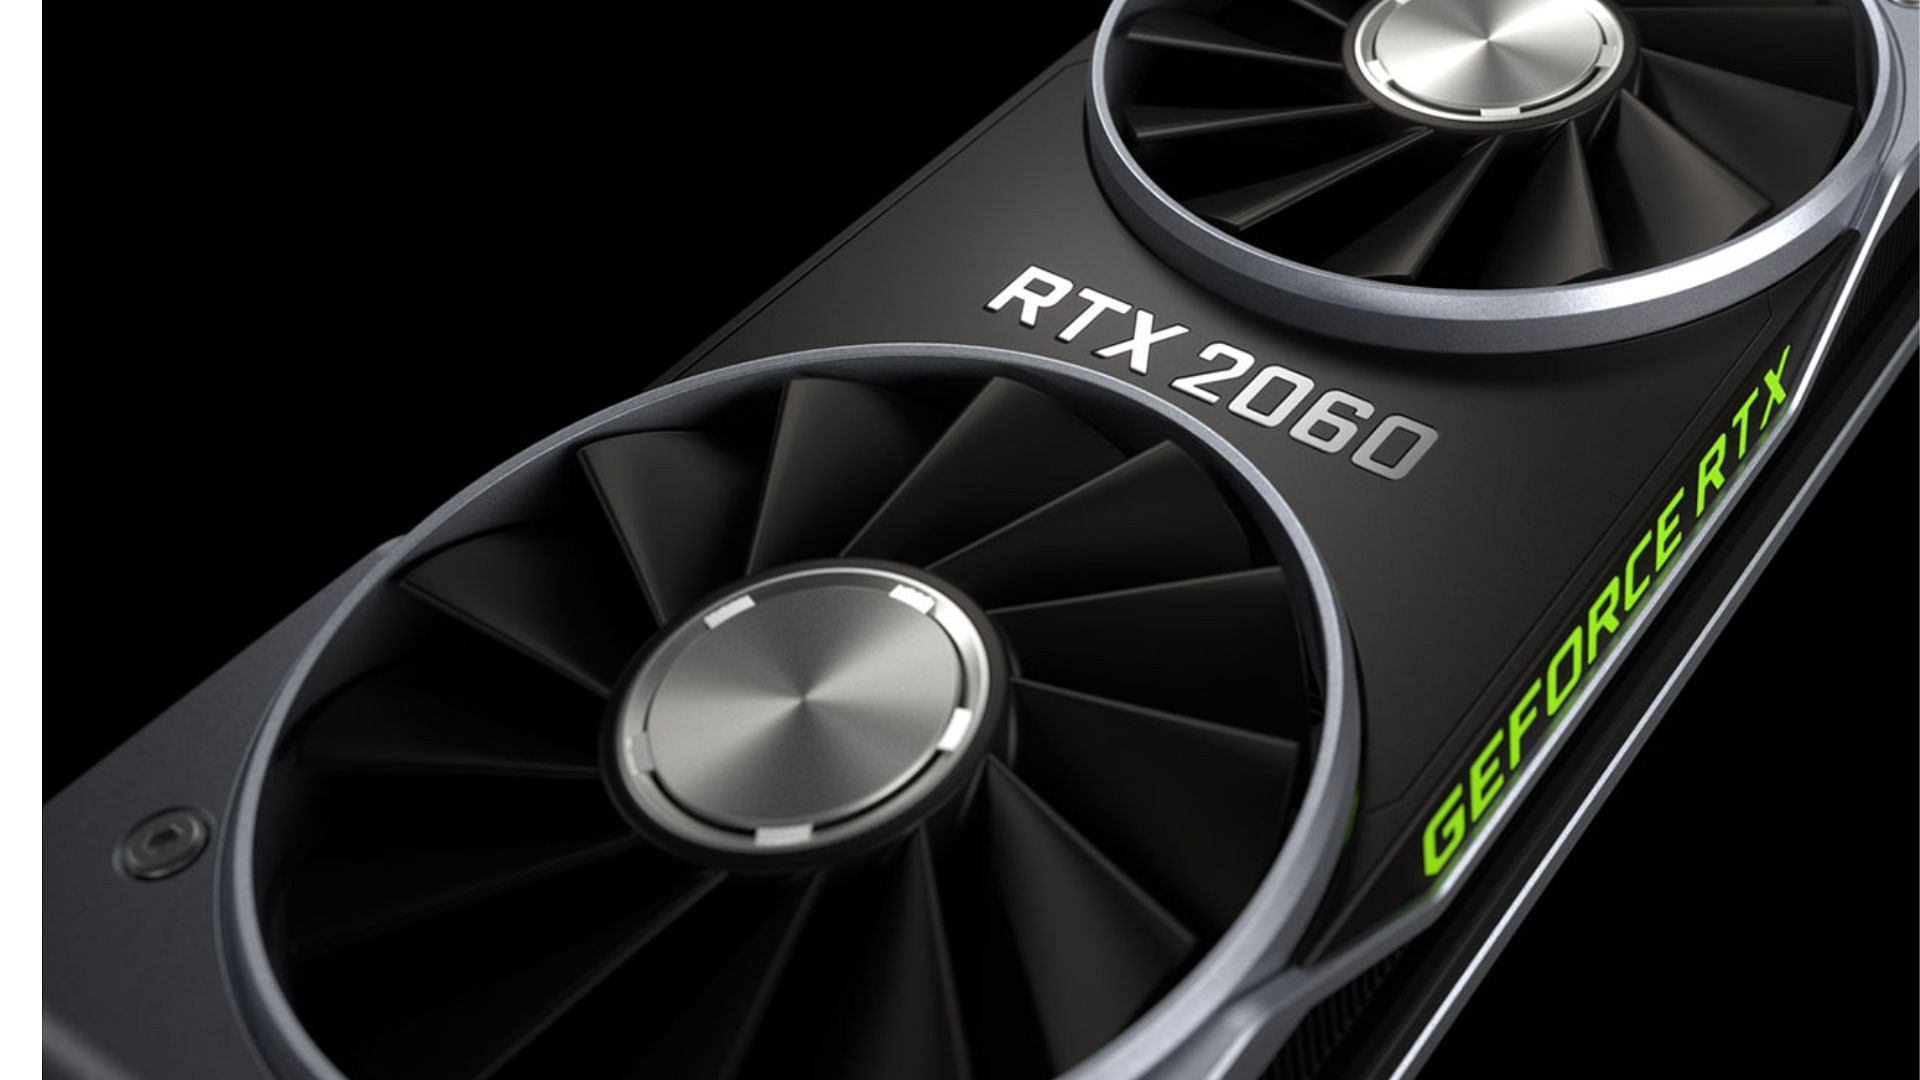 The RTX 2060 Founders